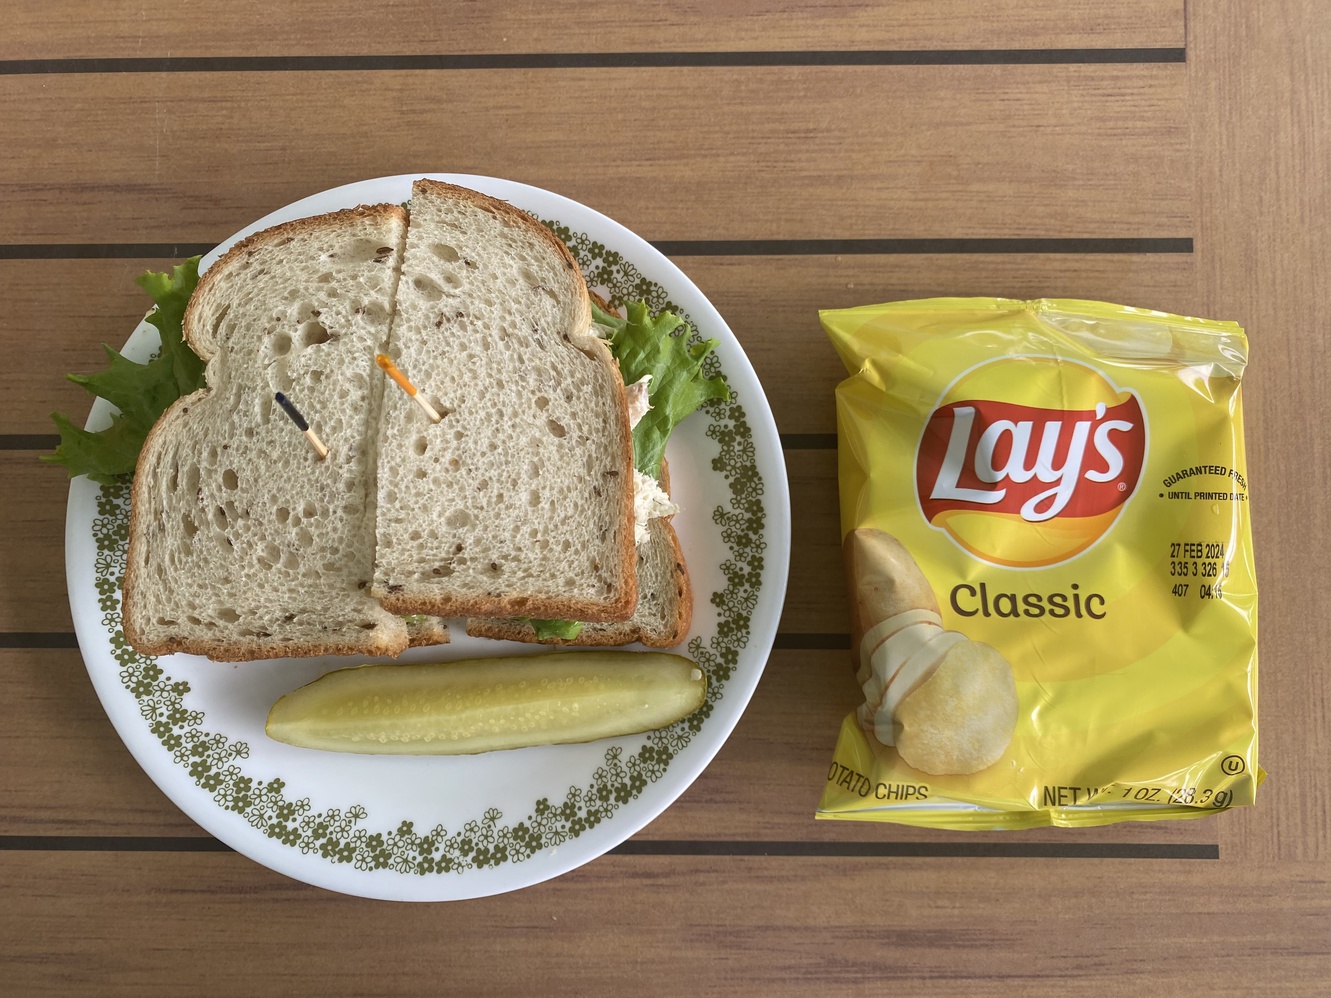 This chicken salad sandwich on wheat bread comes with chips
      and a pickle.